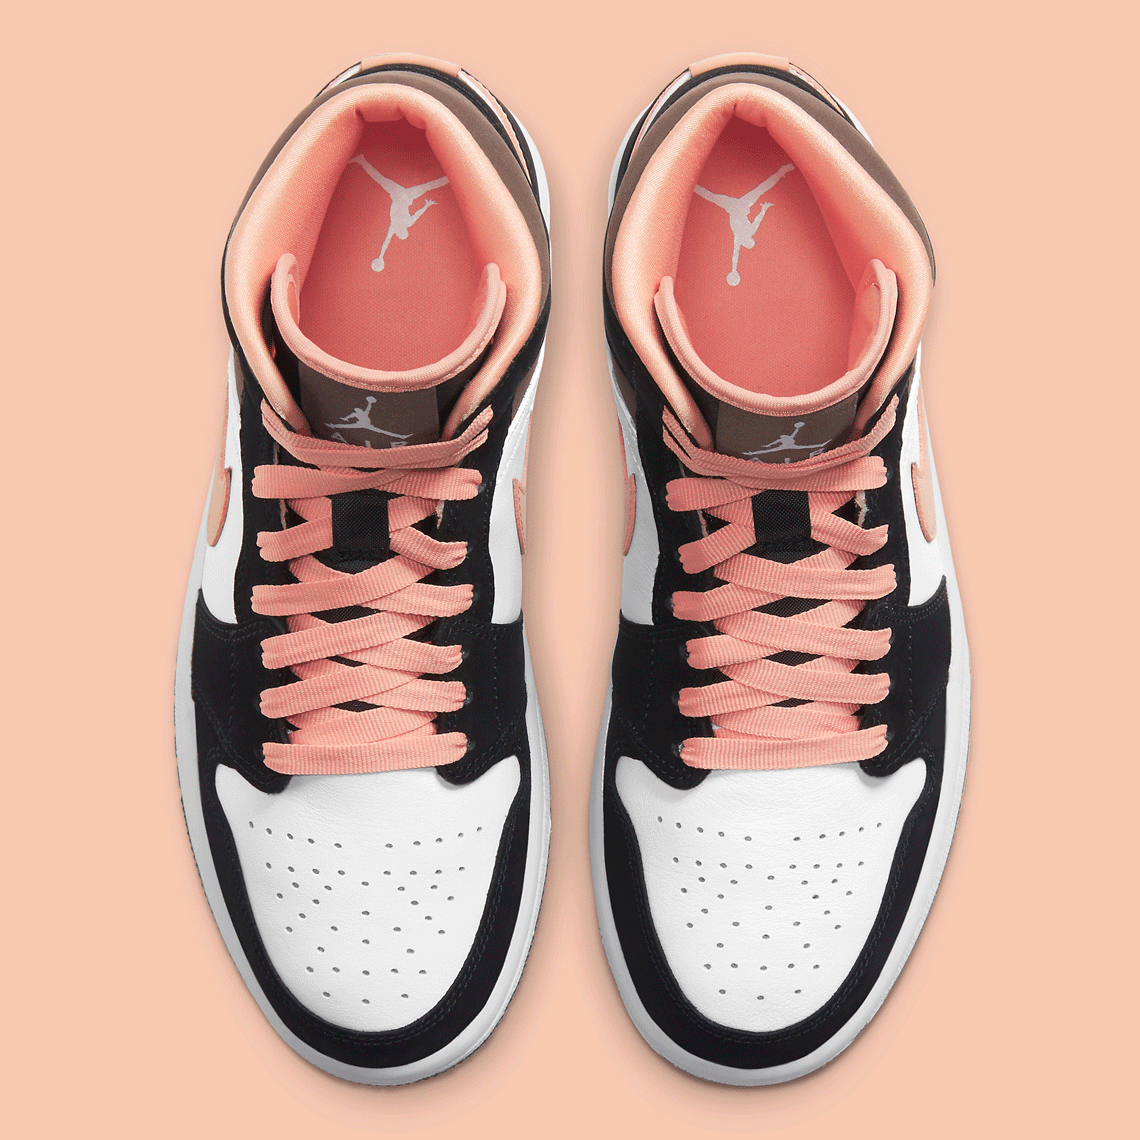 black and white and pink jordan 1